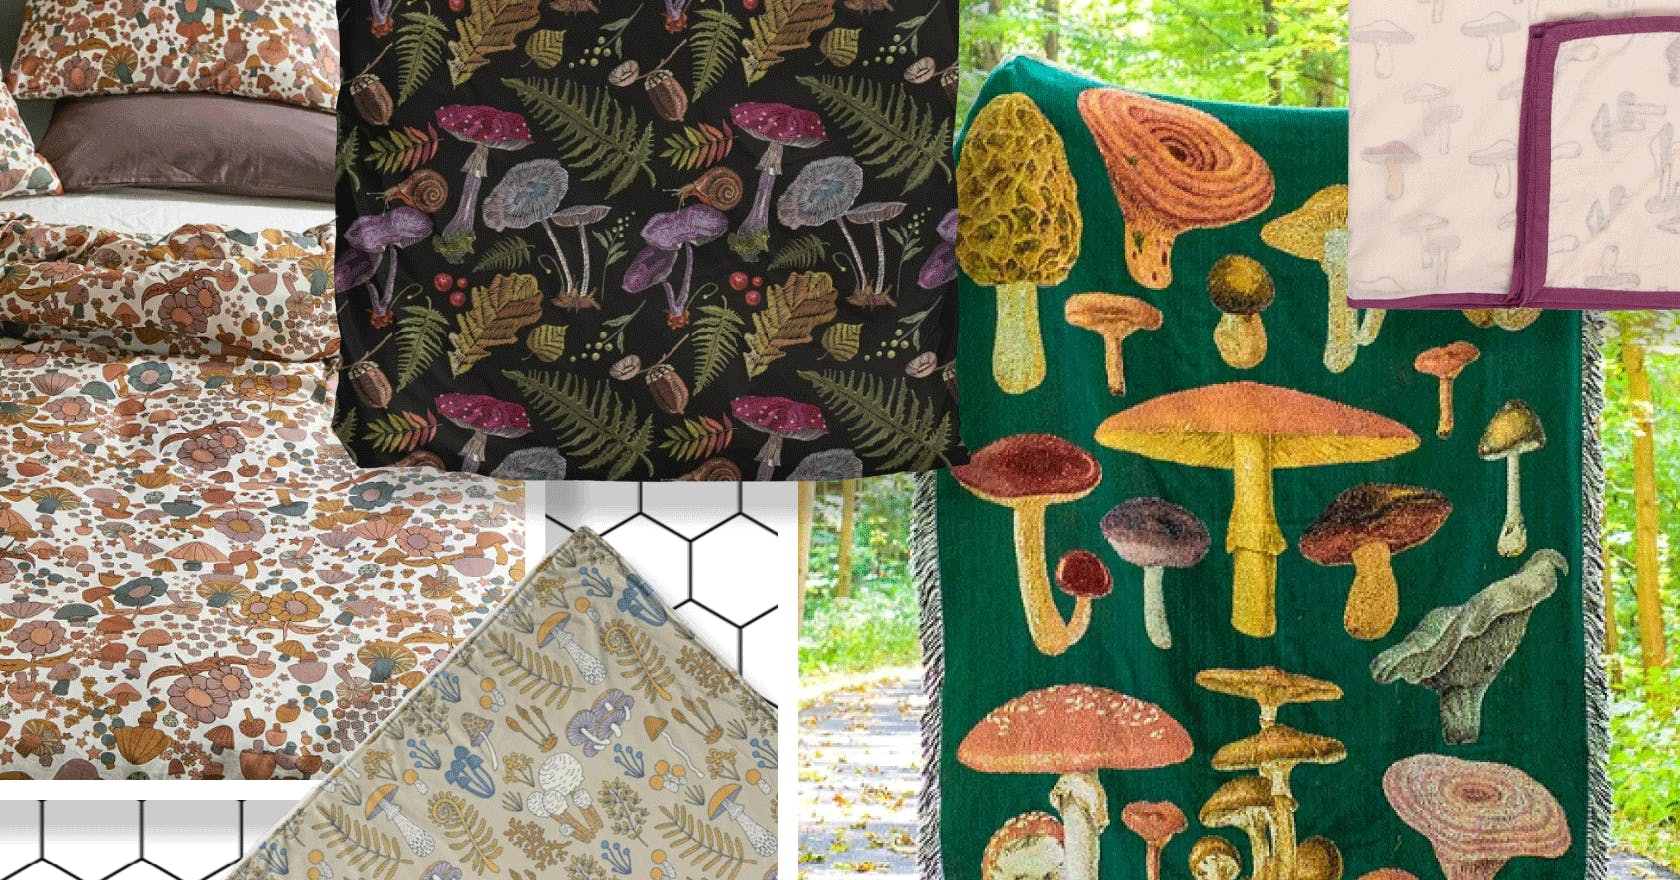 Mushroom print bedding to buy from Etsy, Urban Outfitters & more